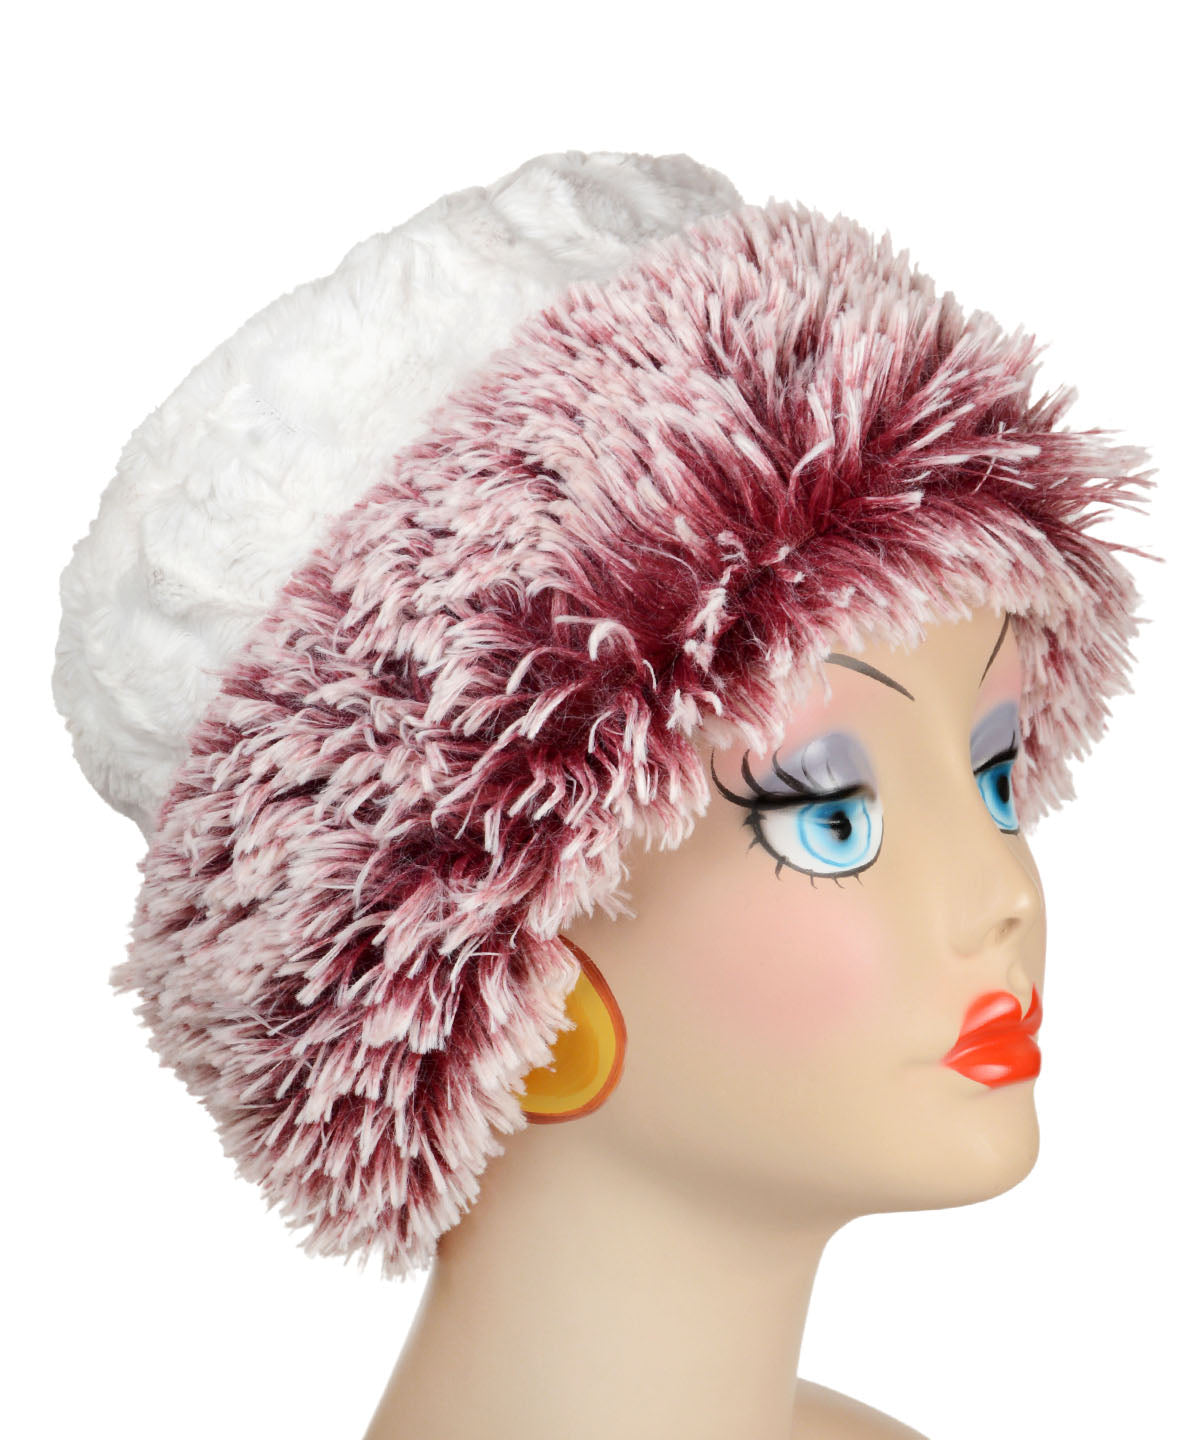 Product shot in Cuffed Pillbox Hat Berry Fox with Cuddly Faux Fur in Ivory